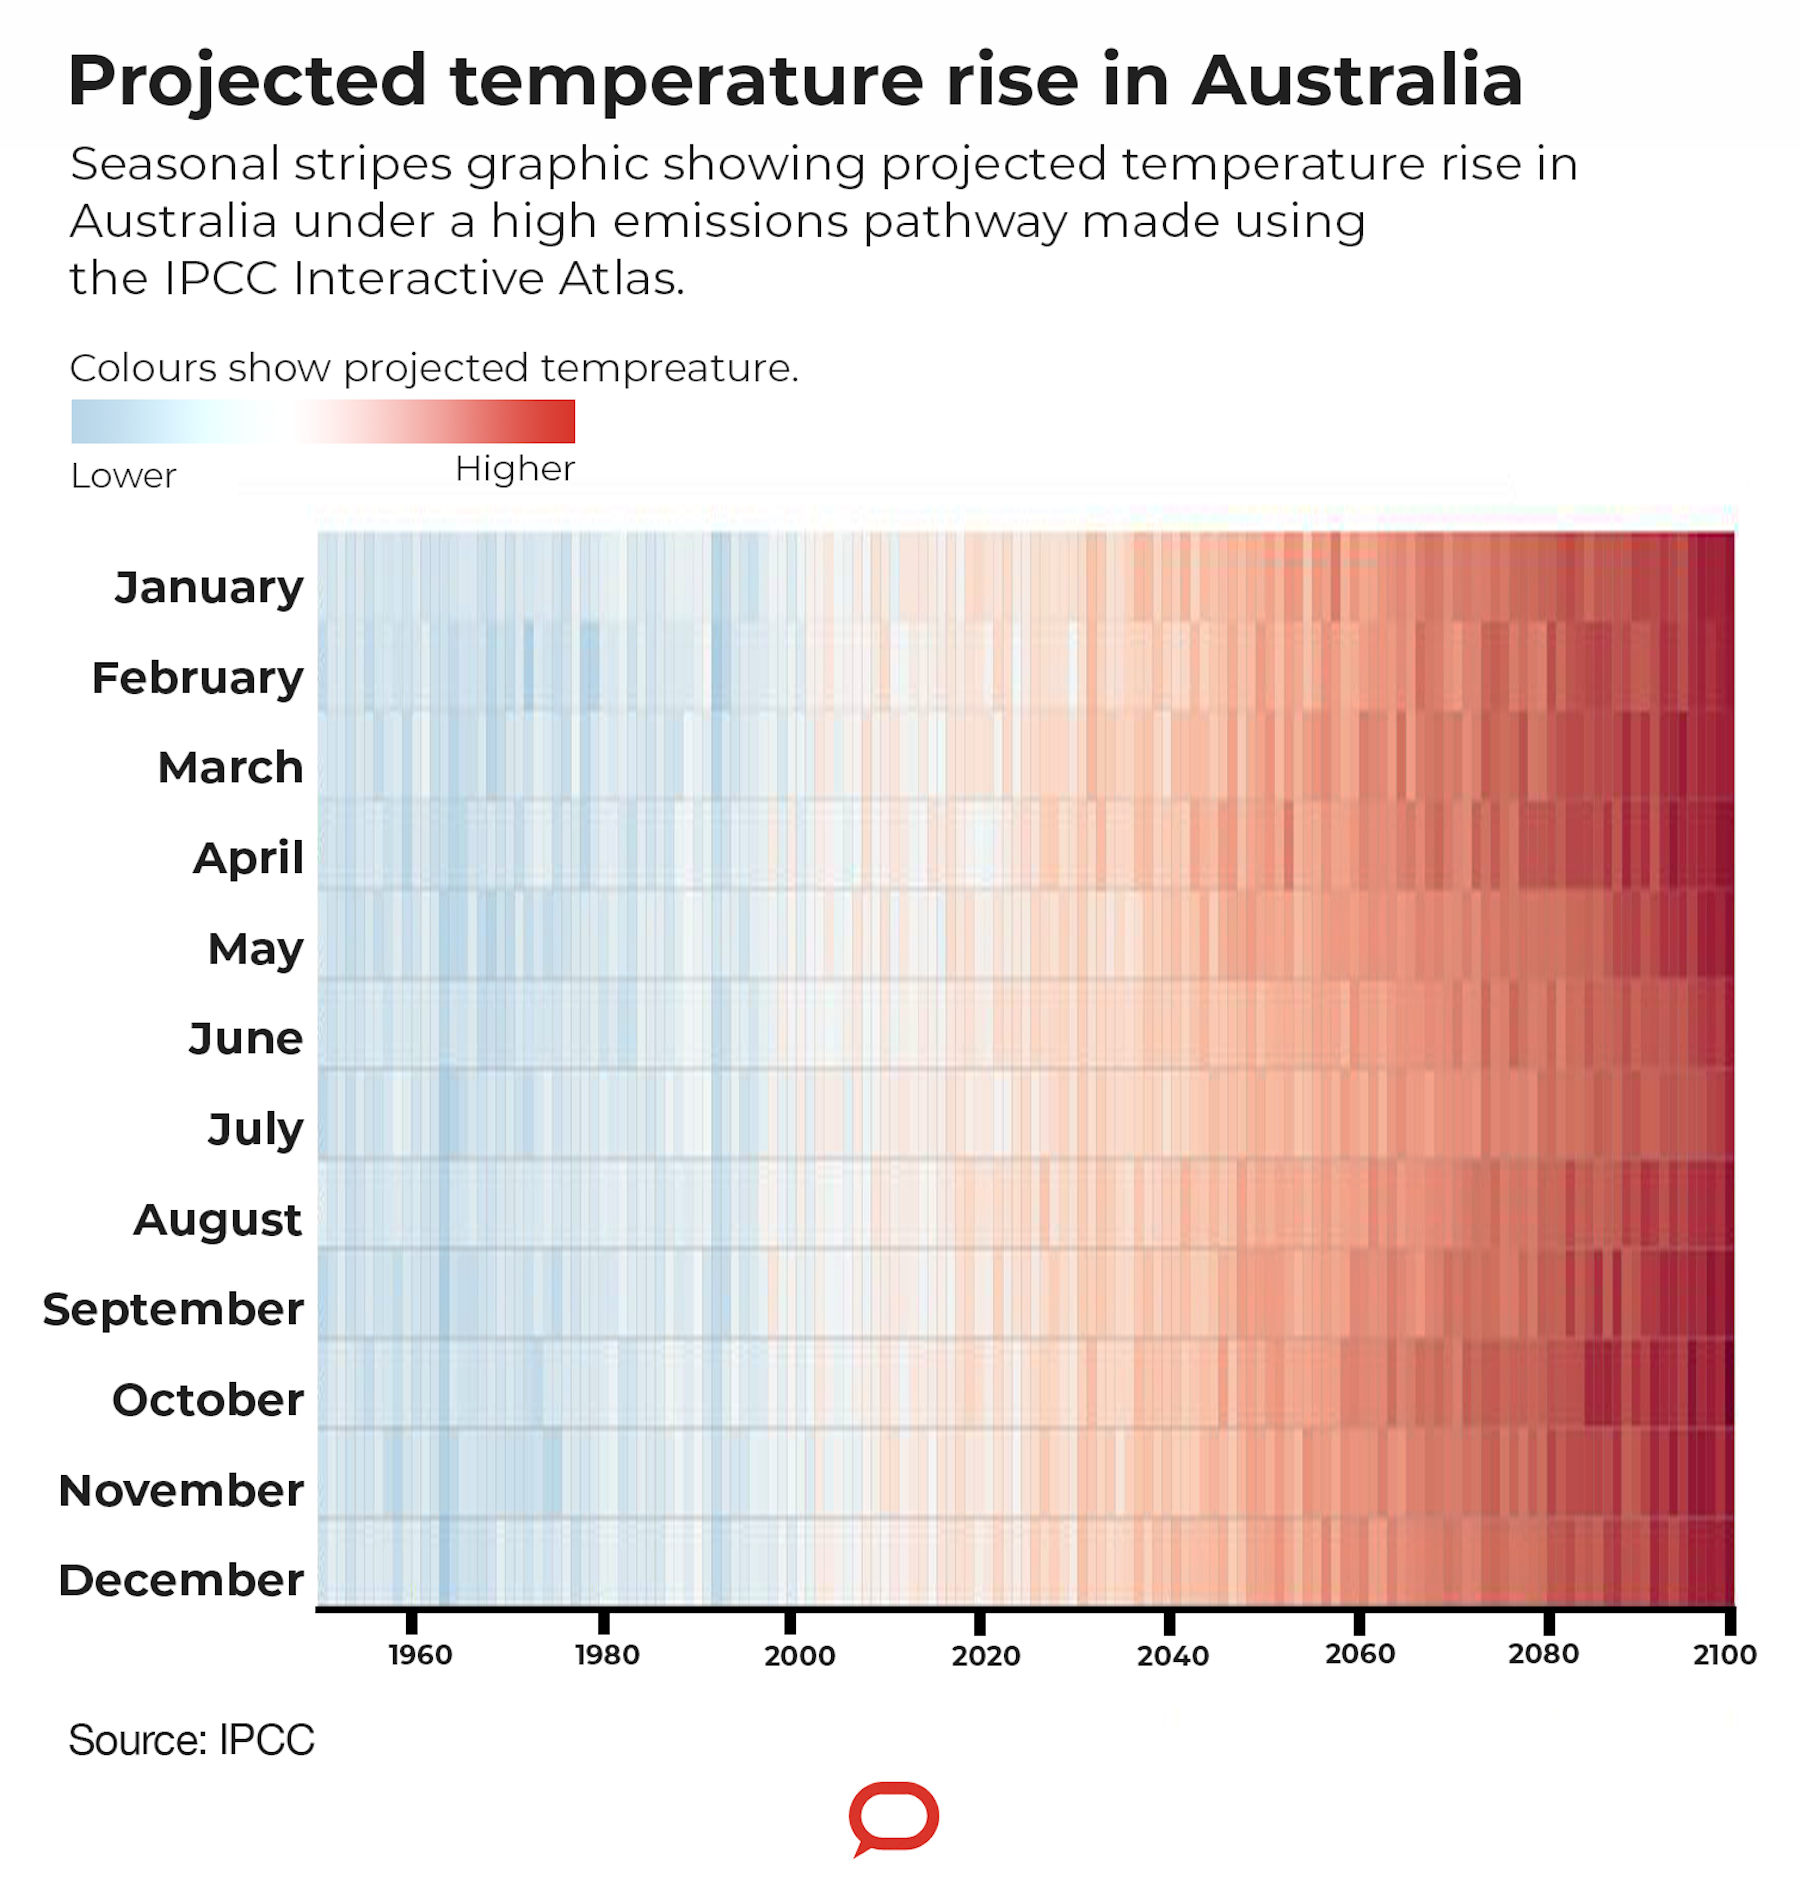 Climate change has already hit. Unless we act now, a hotter, drier and